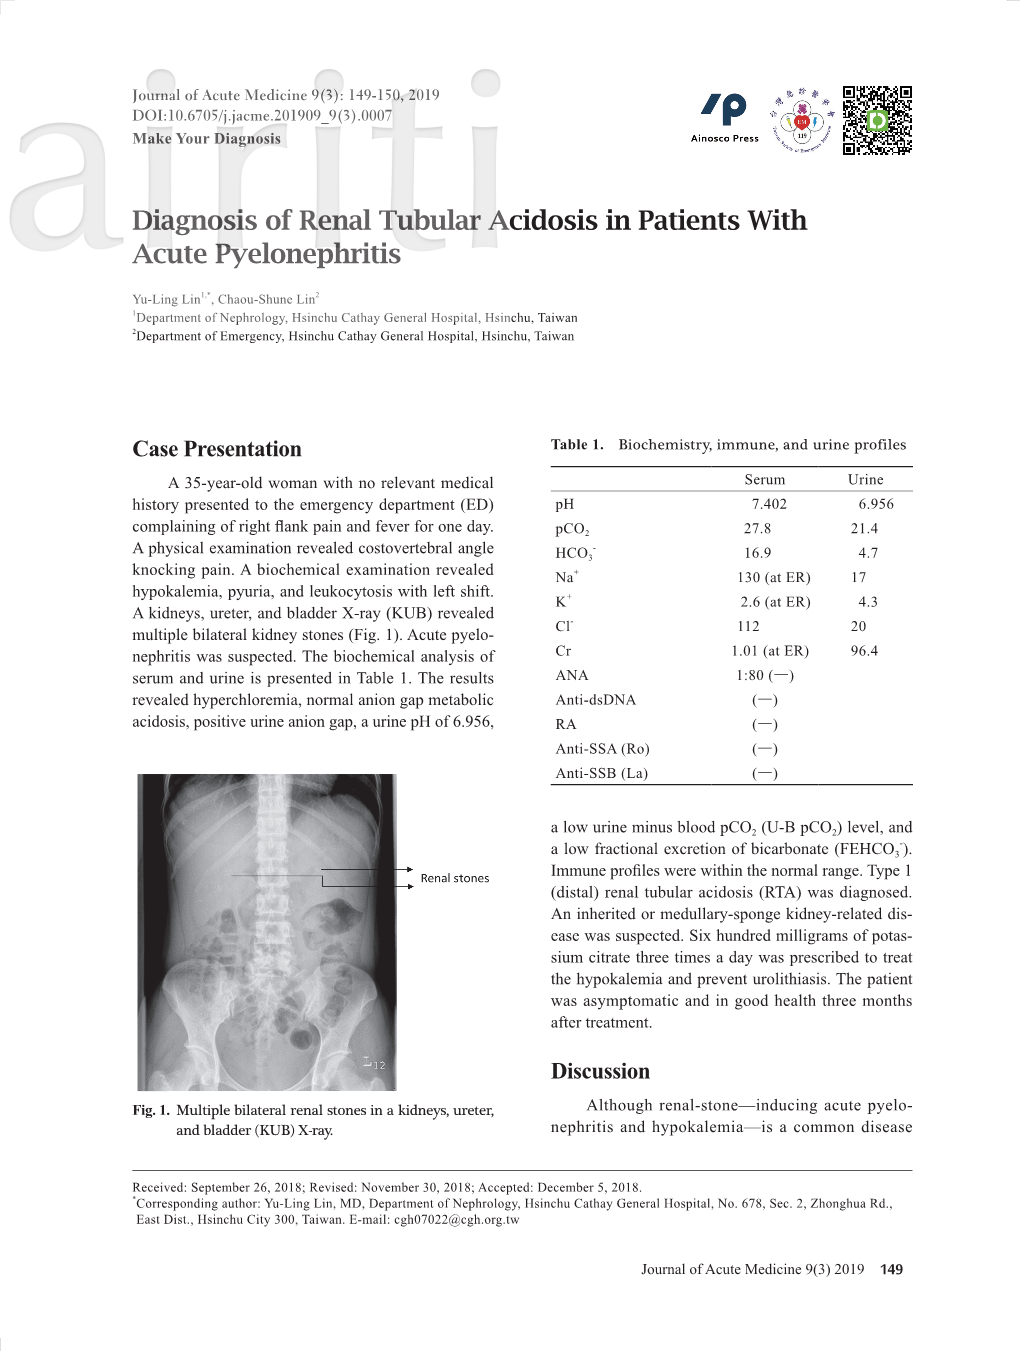 Diagnosis of Renal Tubular Acidosis in Patients with Acute Pyelonephritis